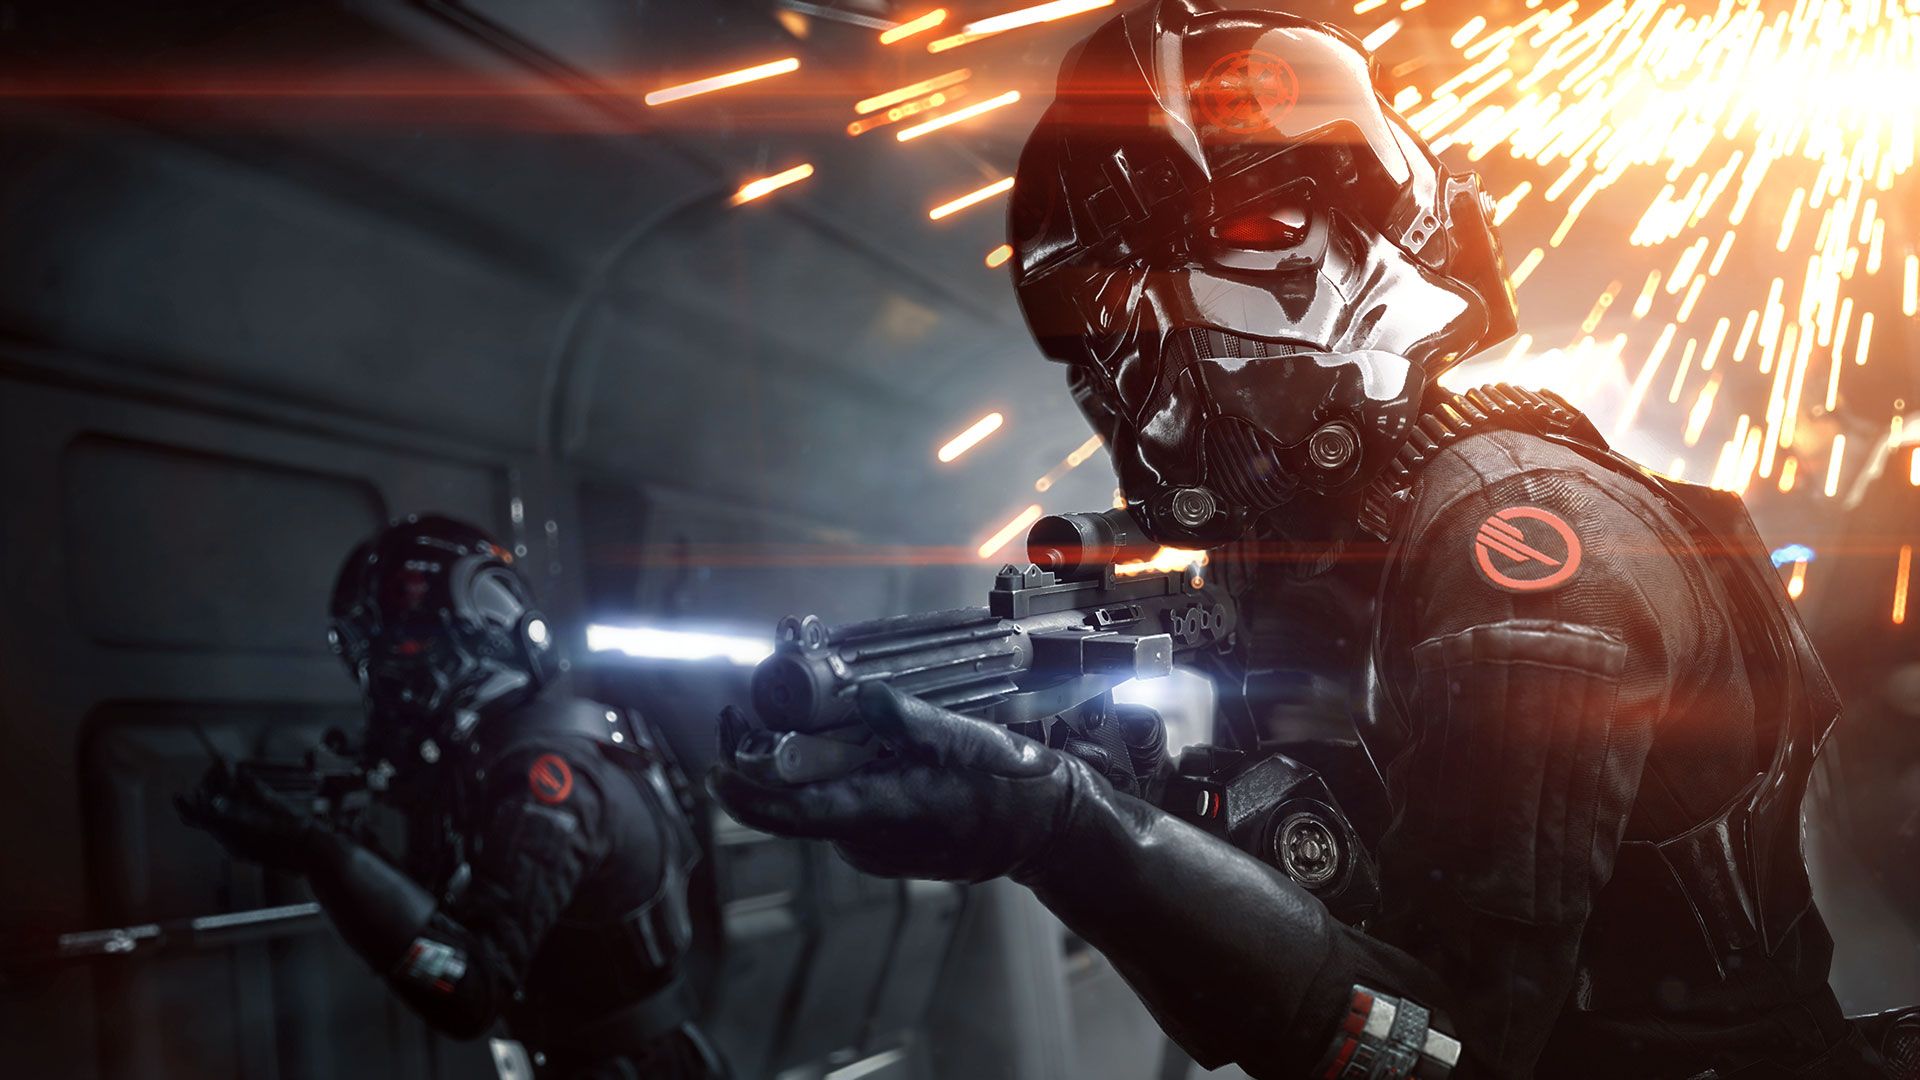 After Revealing Clone Commando, Dice Introduces The Upcoming Star Wars Battlefront 2 Map Felucia